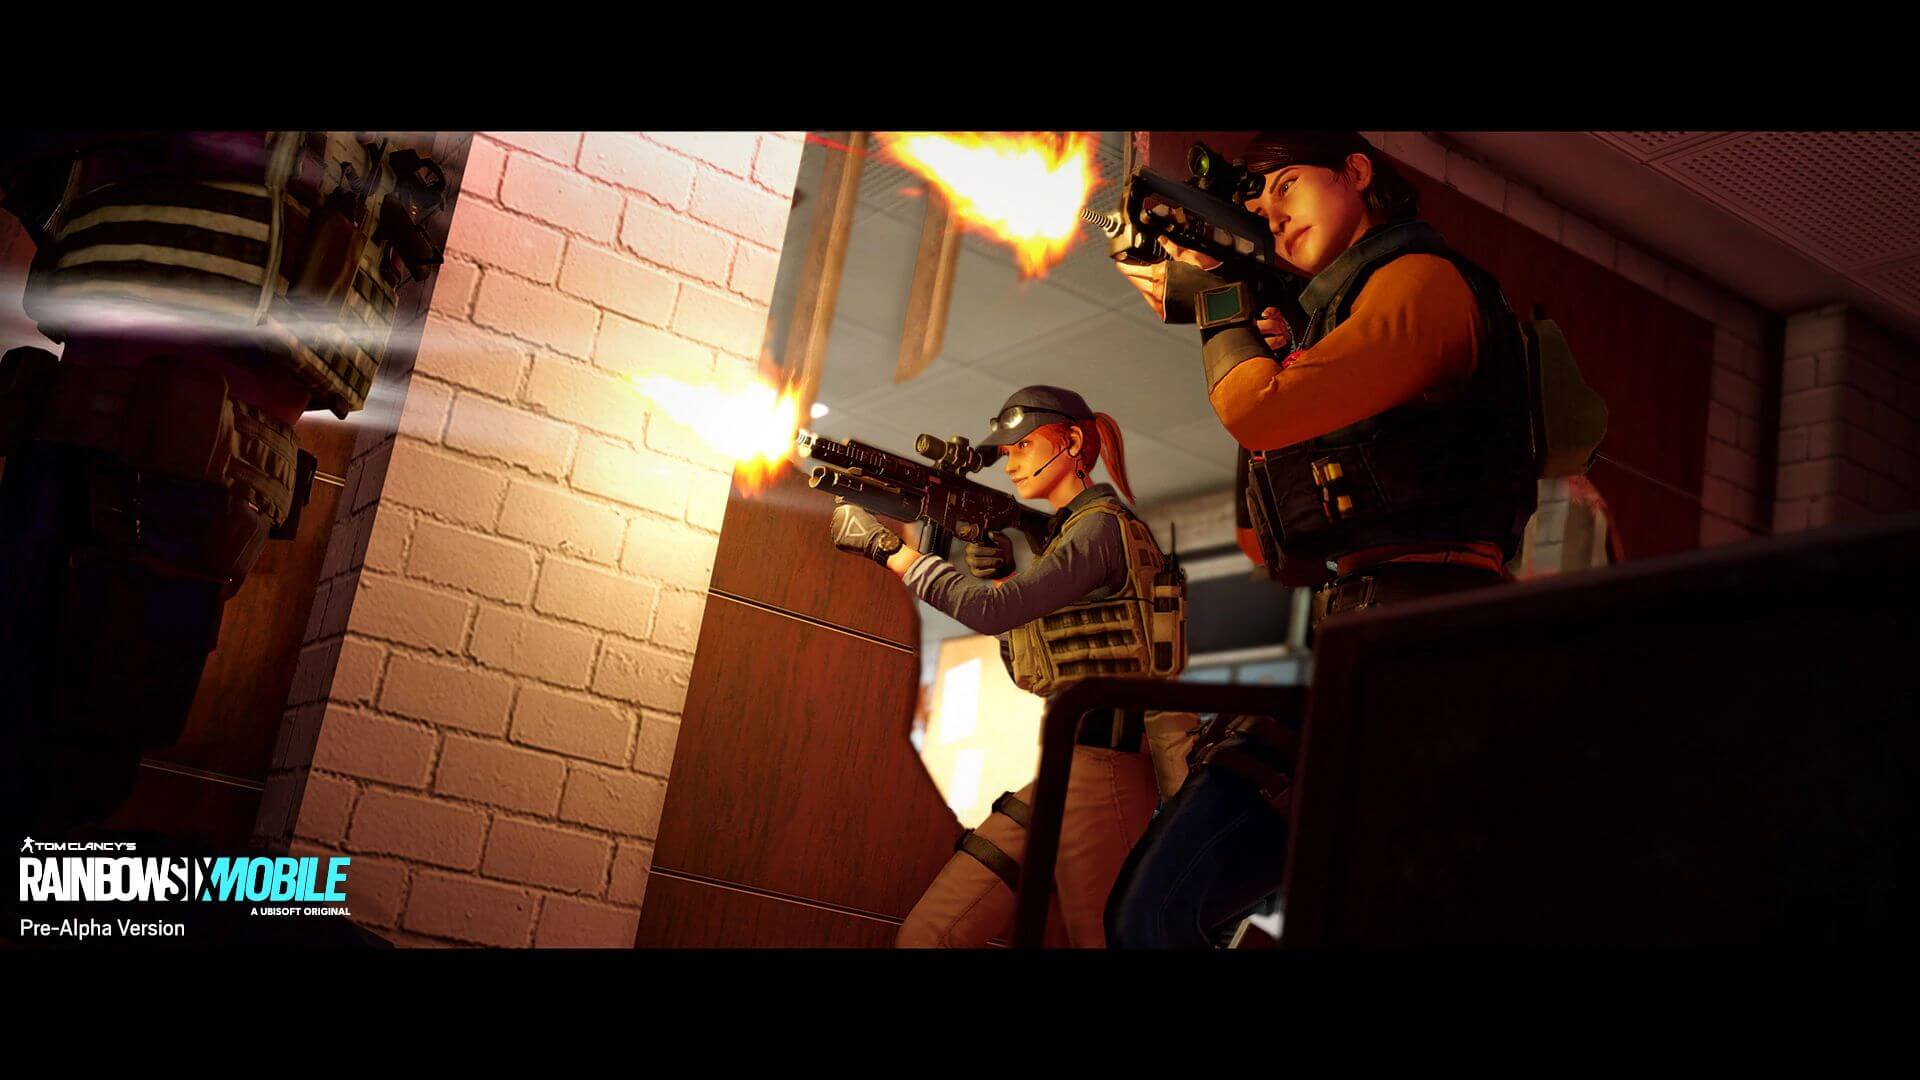 Rainbow Six Mobile para Android - Download